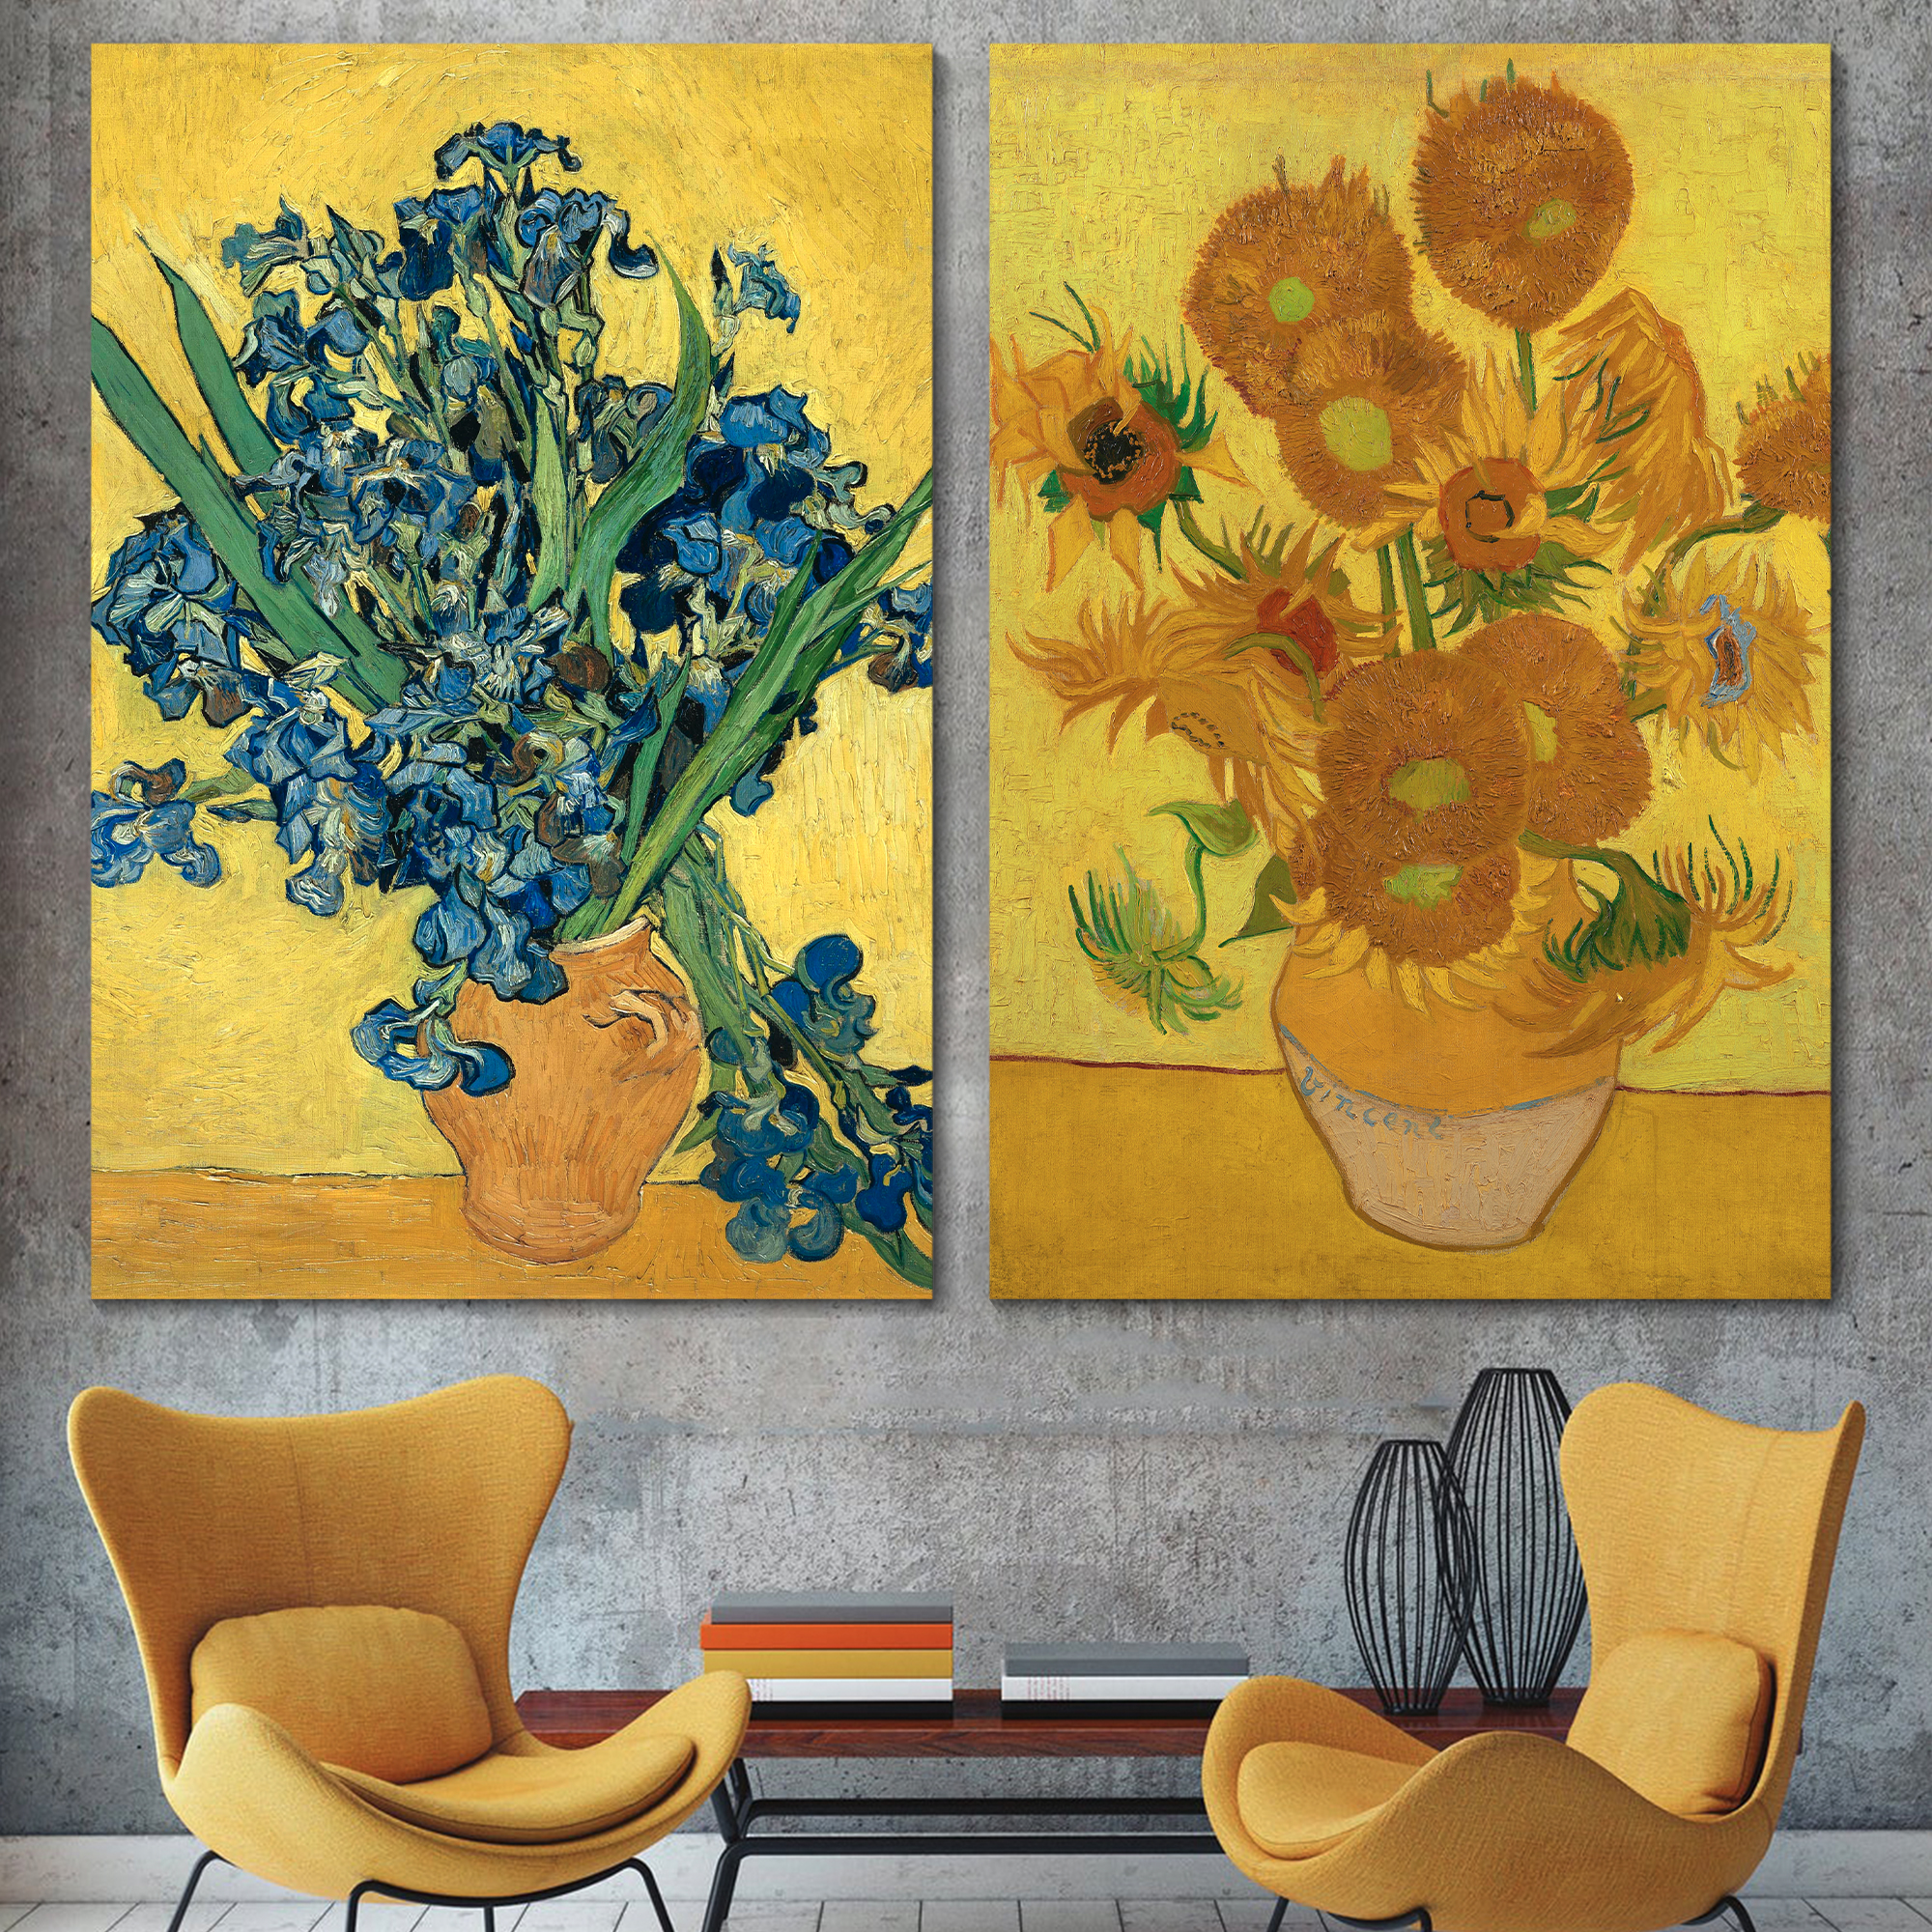 The Sunflowers/Irises by Vincent Van Gogh - Oil Painting Reproduction in Set of 2 | Canvas Prints Wall Art, Ready to Hang - 16